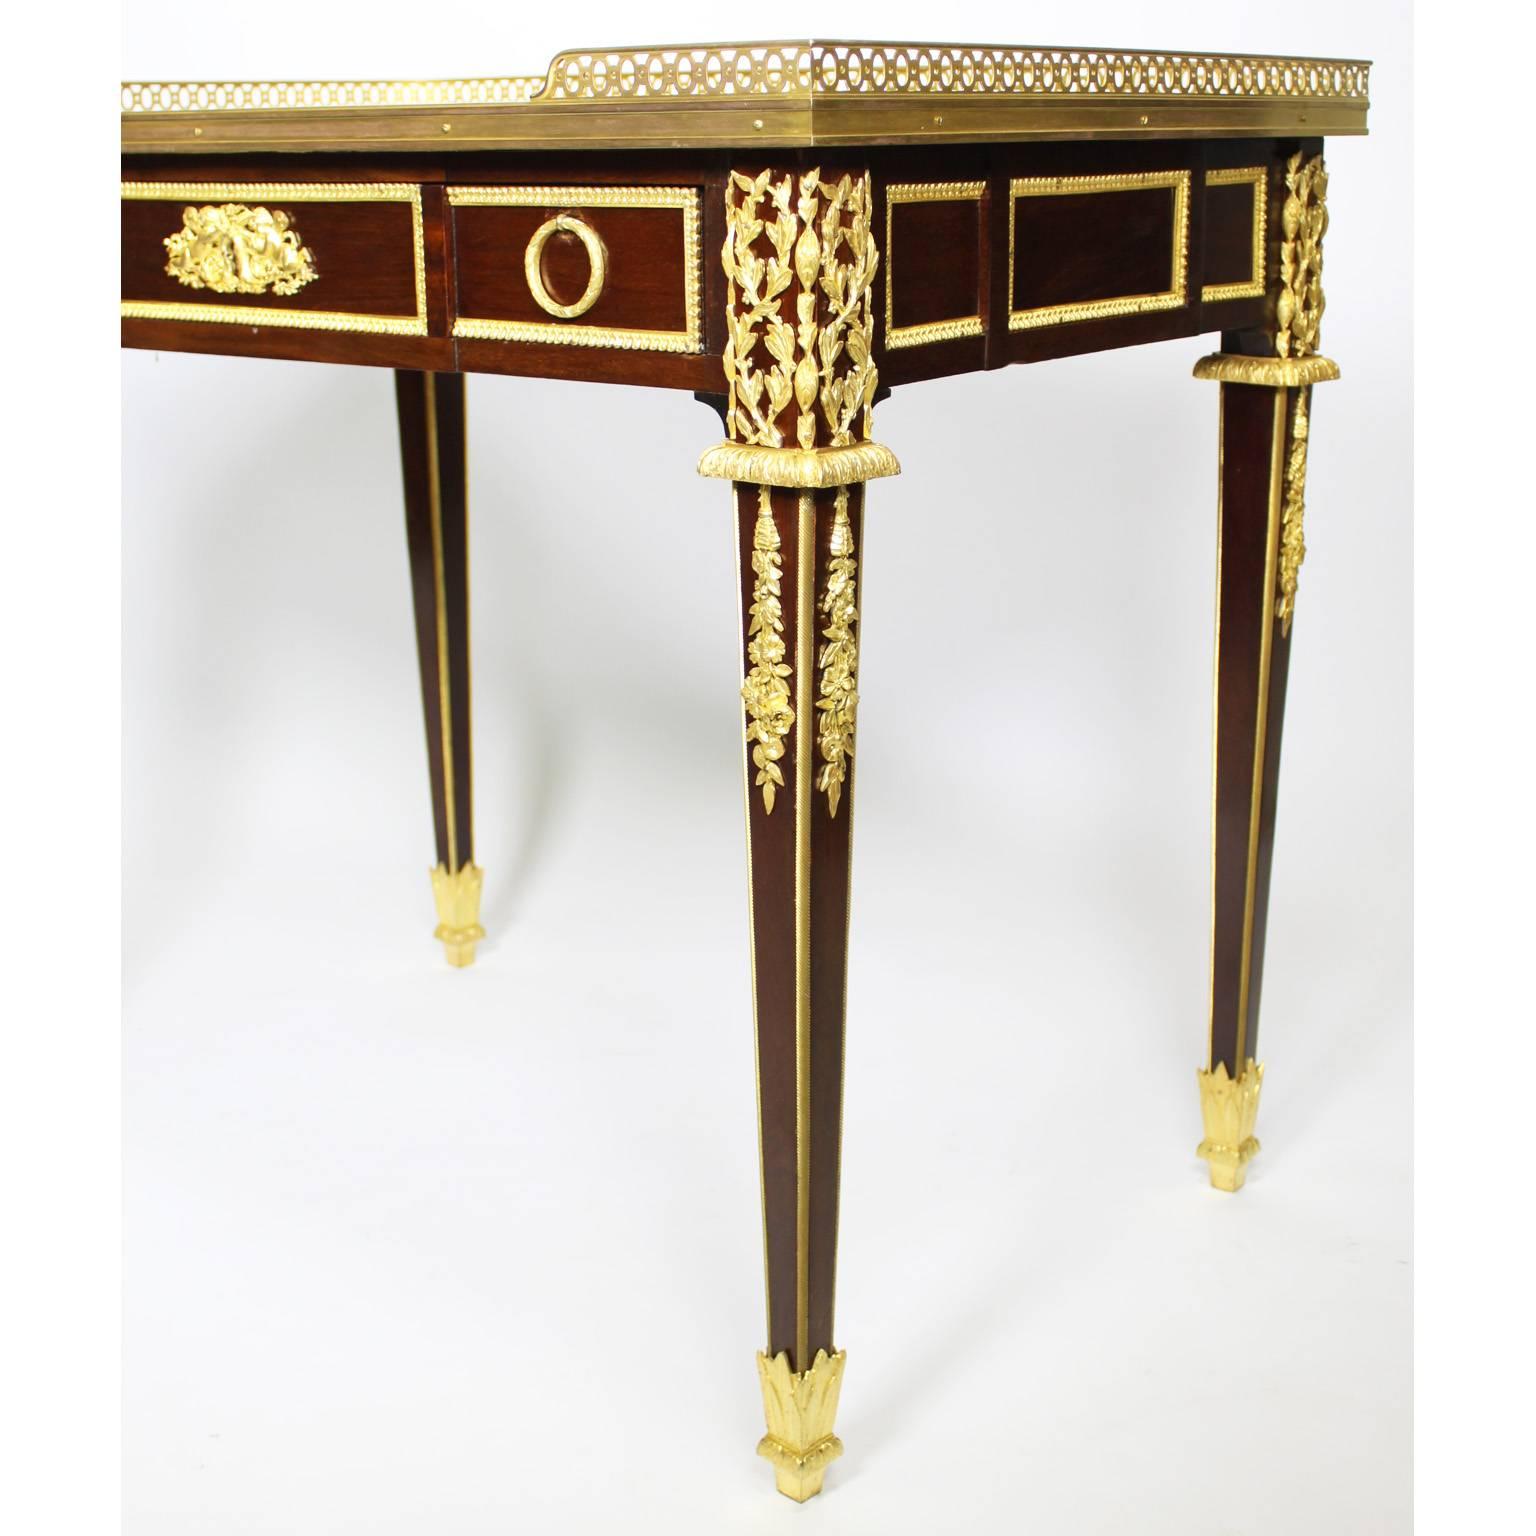 Carved French 19th-20th Century Louis XVI Style Mahogany and Gilt-Bronze Mounted Table